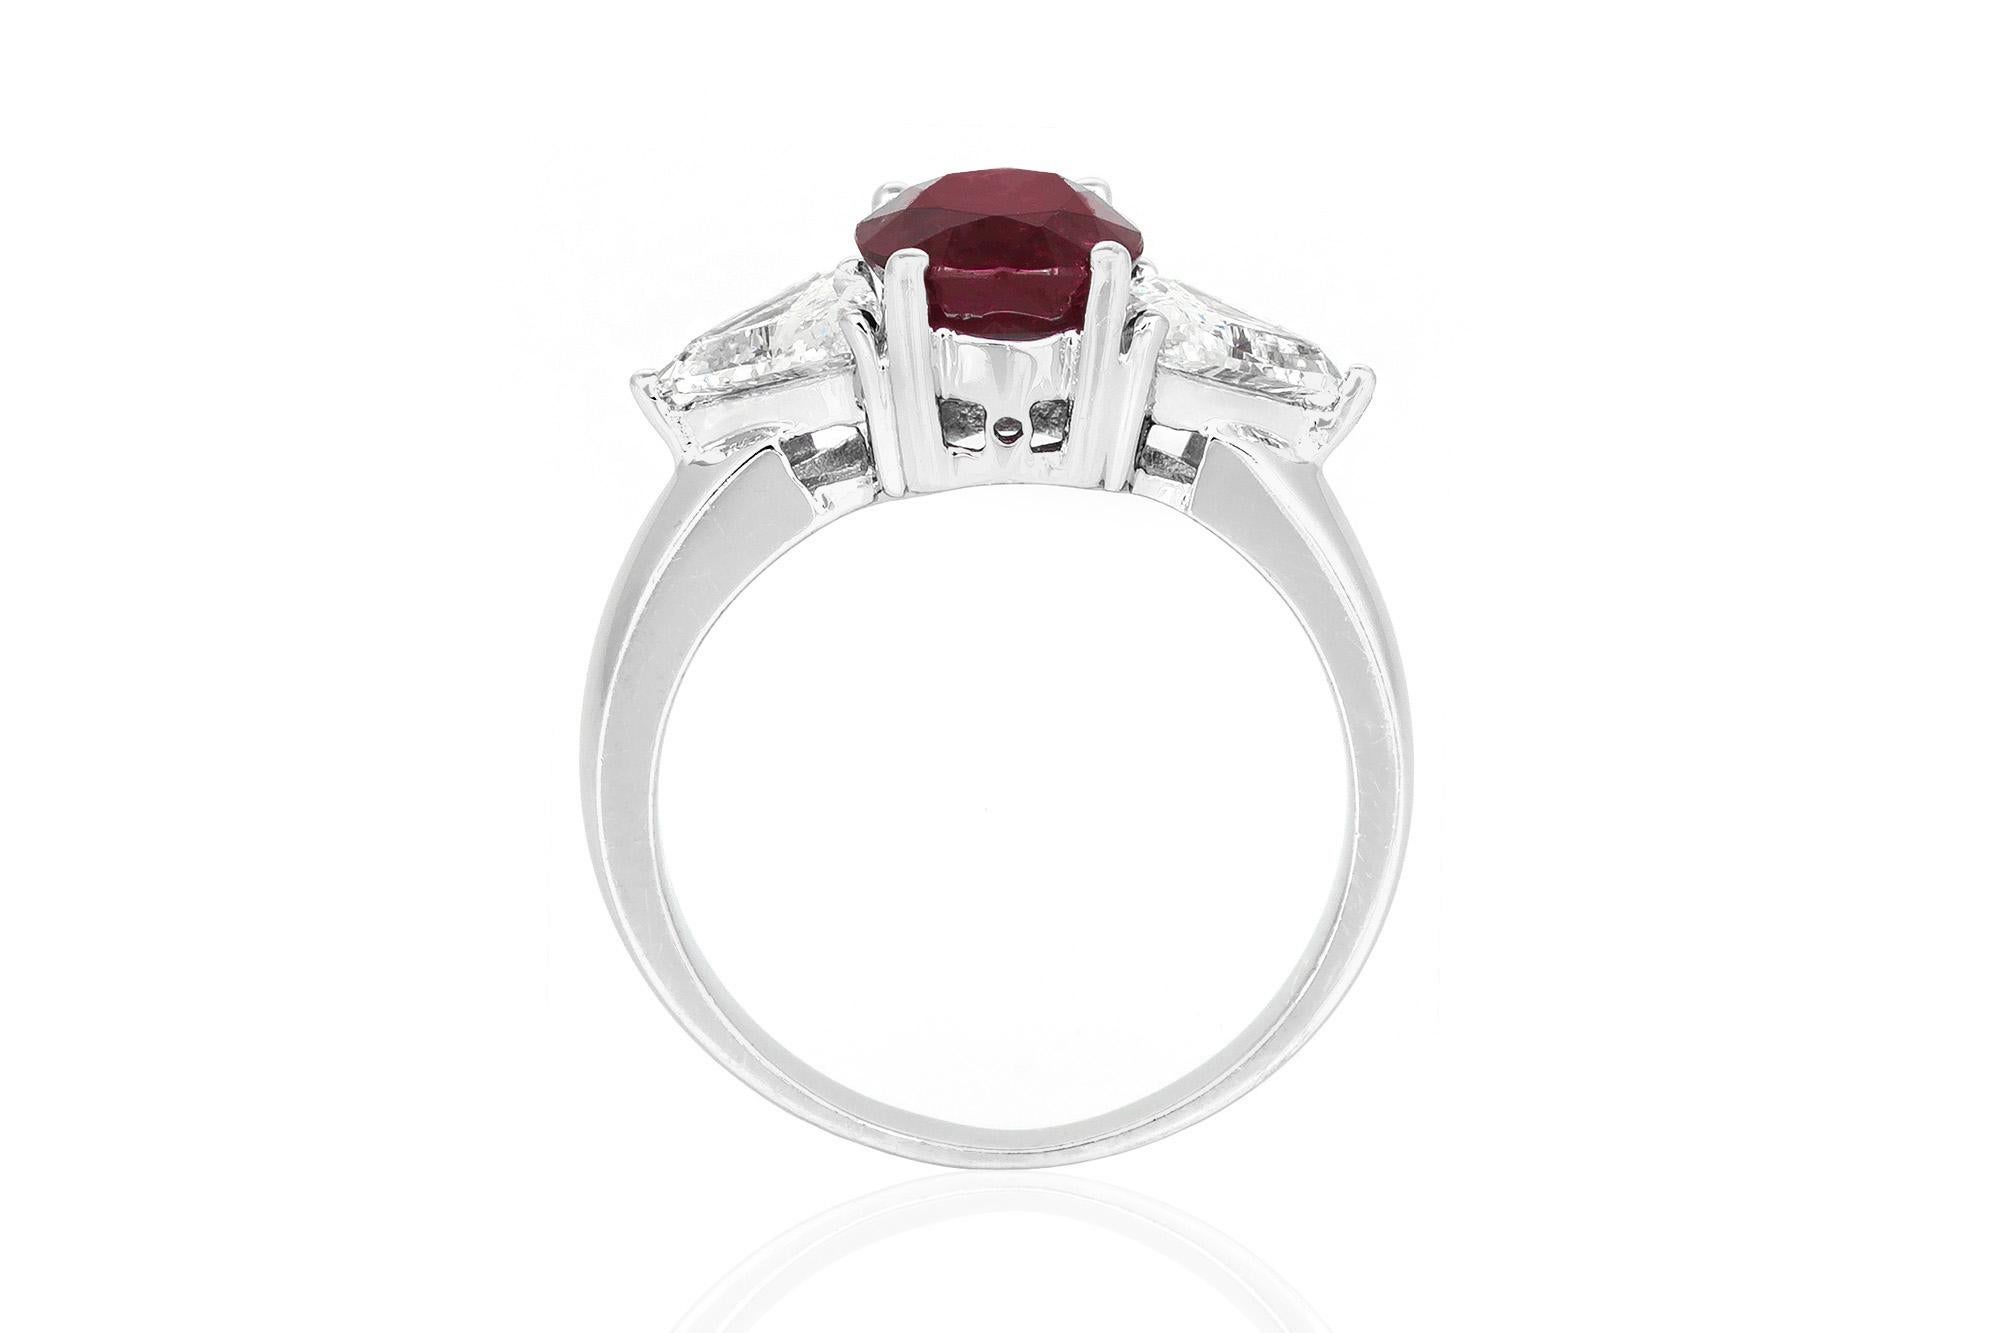 Estate ring finely crafted in 18K white gold. It features a vibrant red 2.52 carat oval shaped ruby flanked by trillion cut diamonds, weighing a total of 1.05 carat. Circa 1990's.